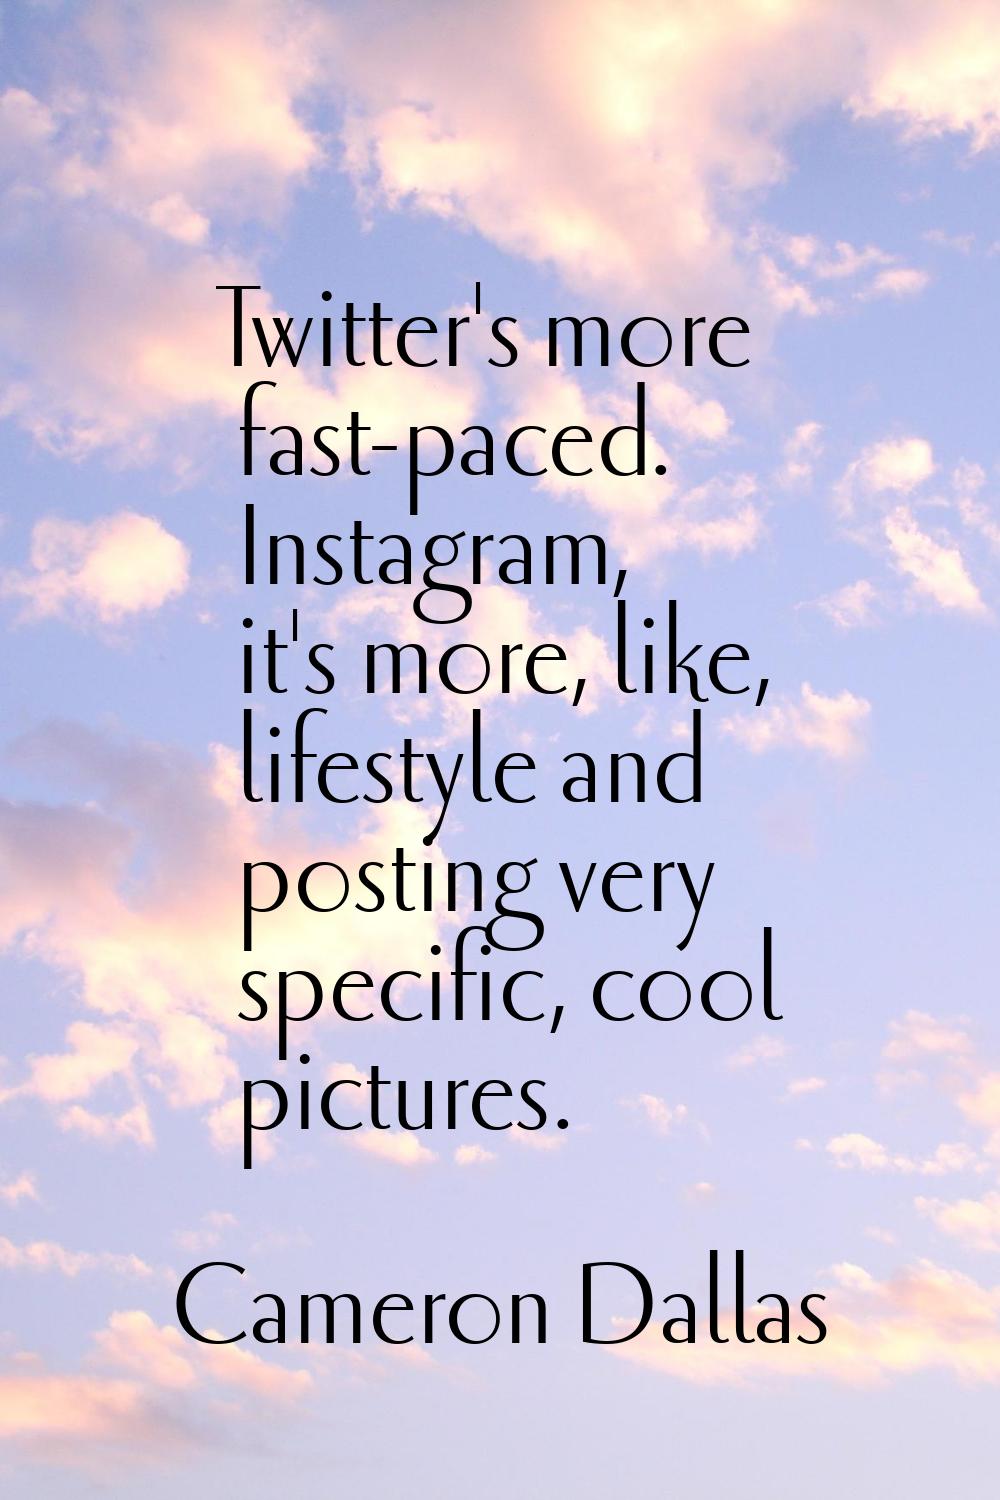 Twitter's more fast-paced. Instagram, it's more, like, lifestyle and posting very specific, cool pi